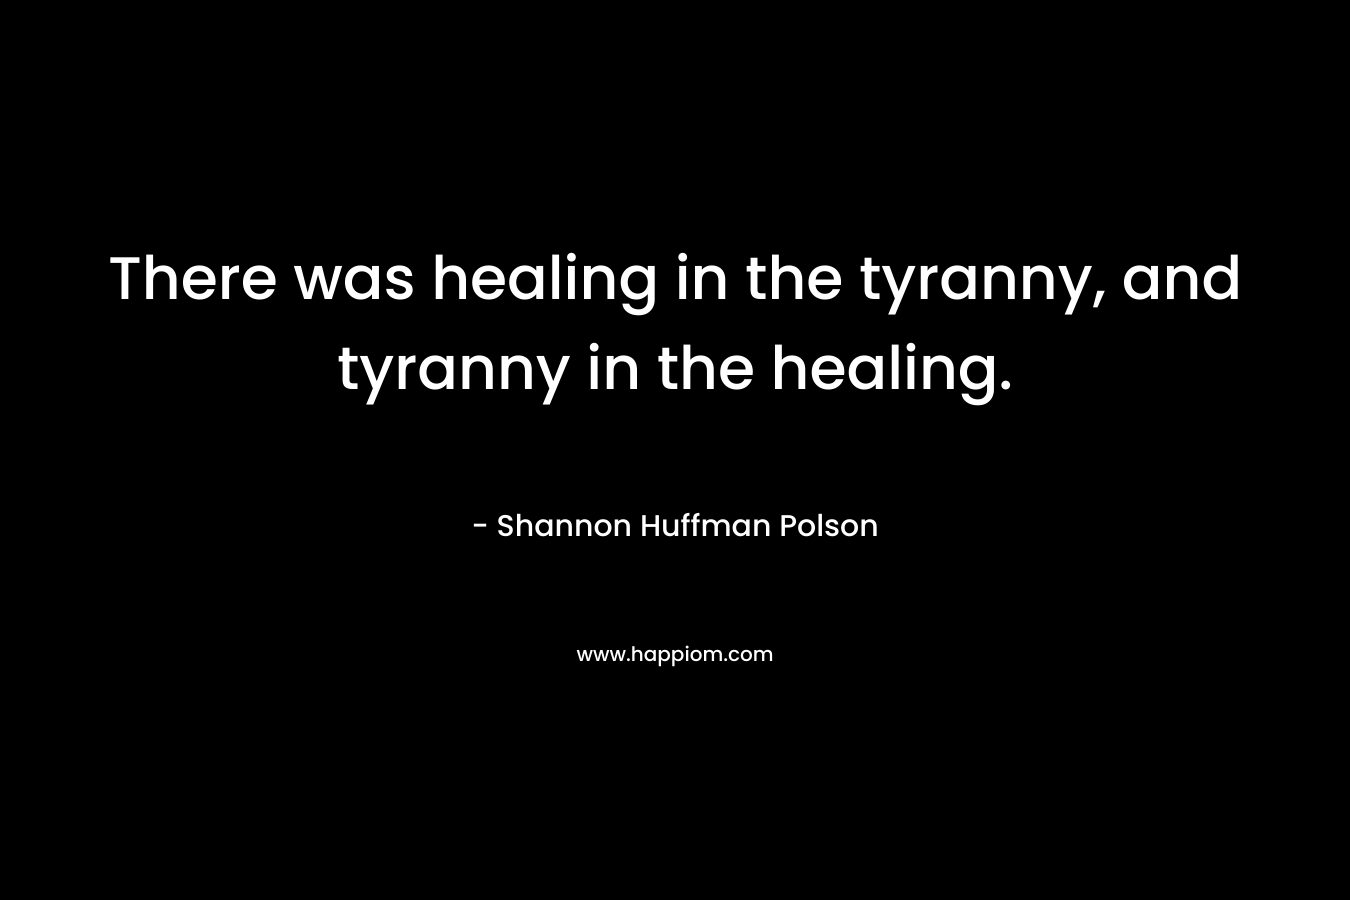 There was healing in the tyranny, and tyranny in the healing. – Shannon Huffman Polson